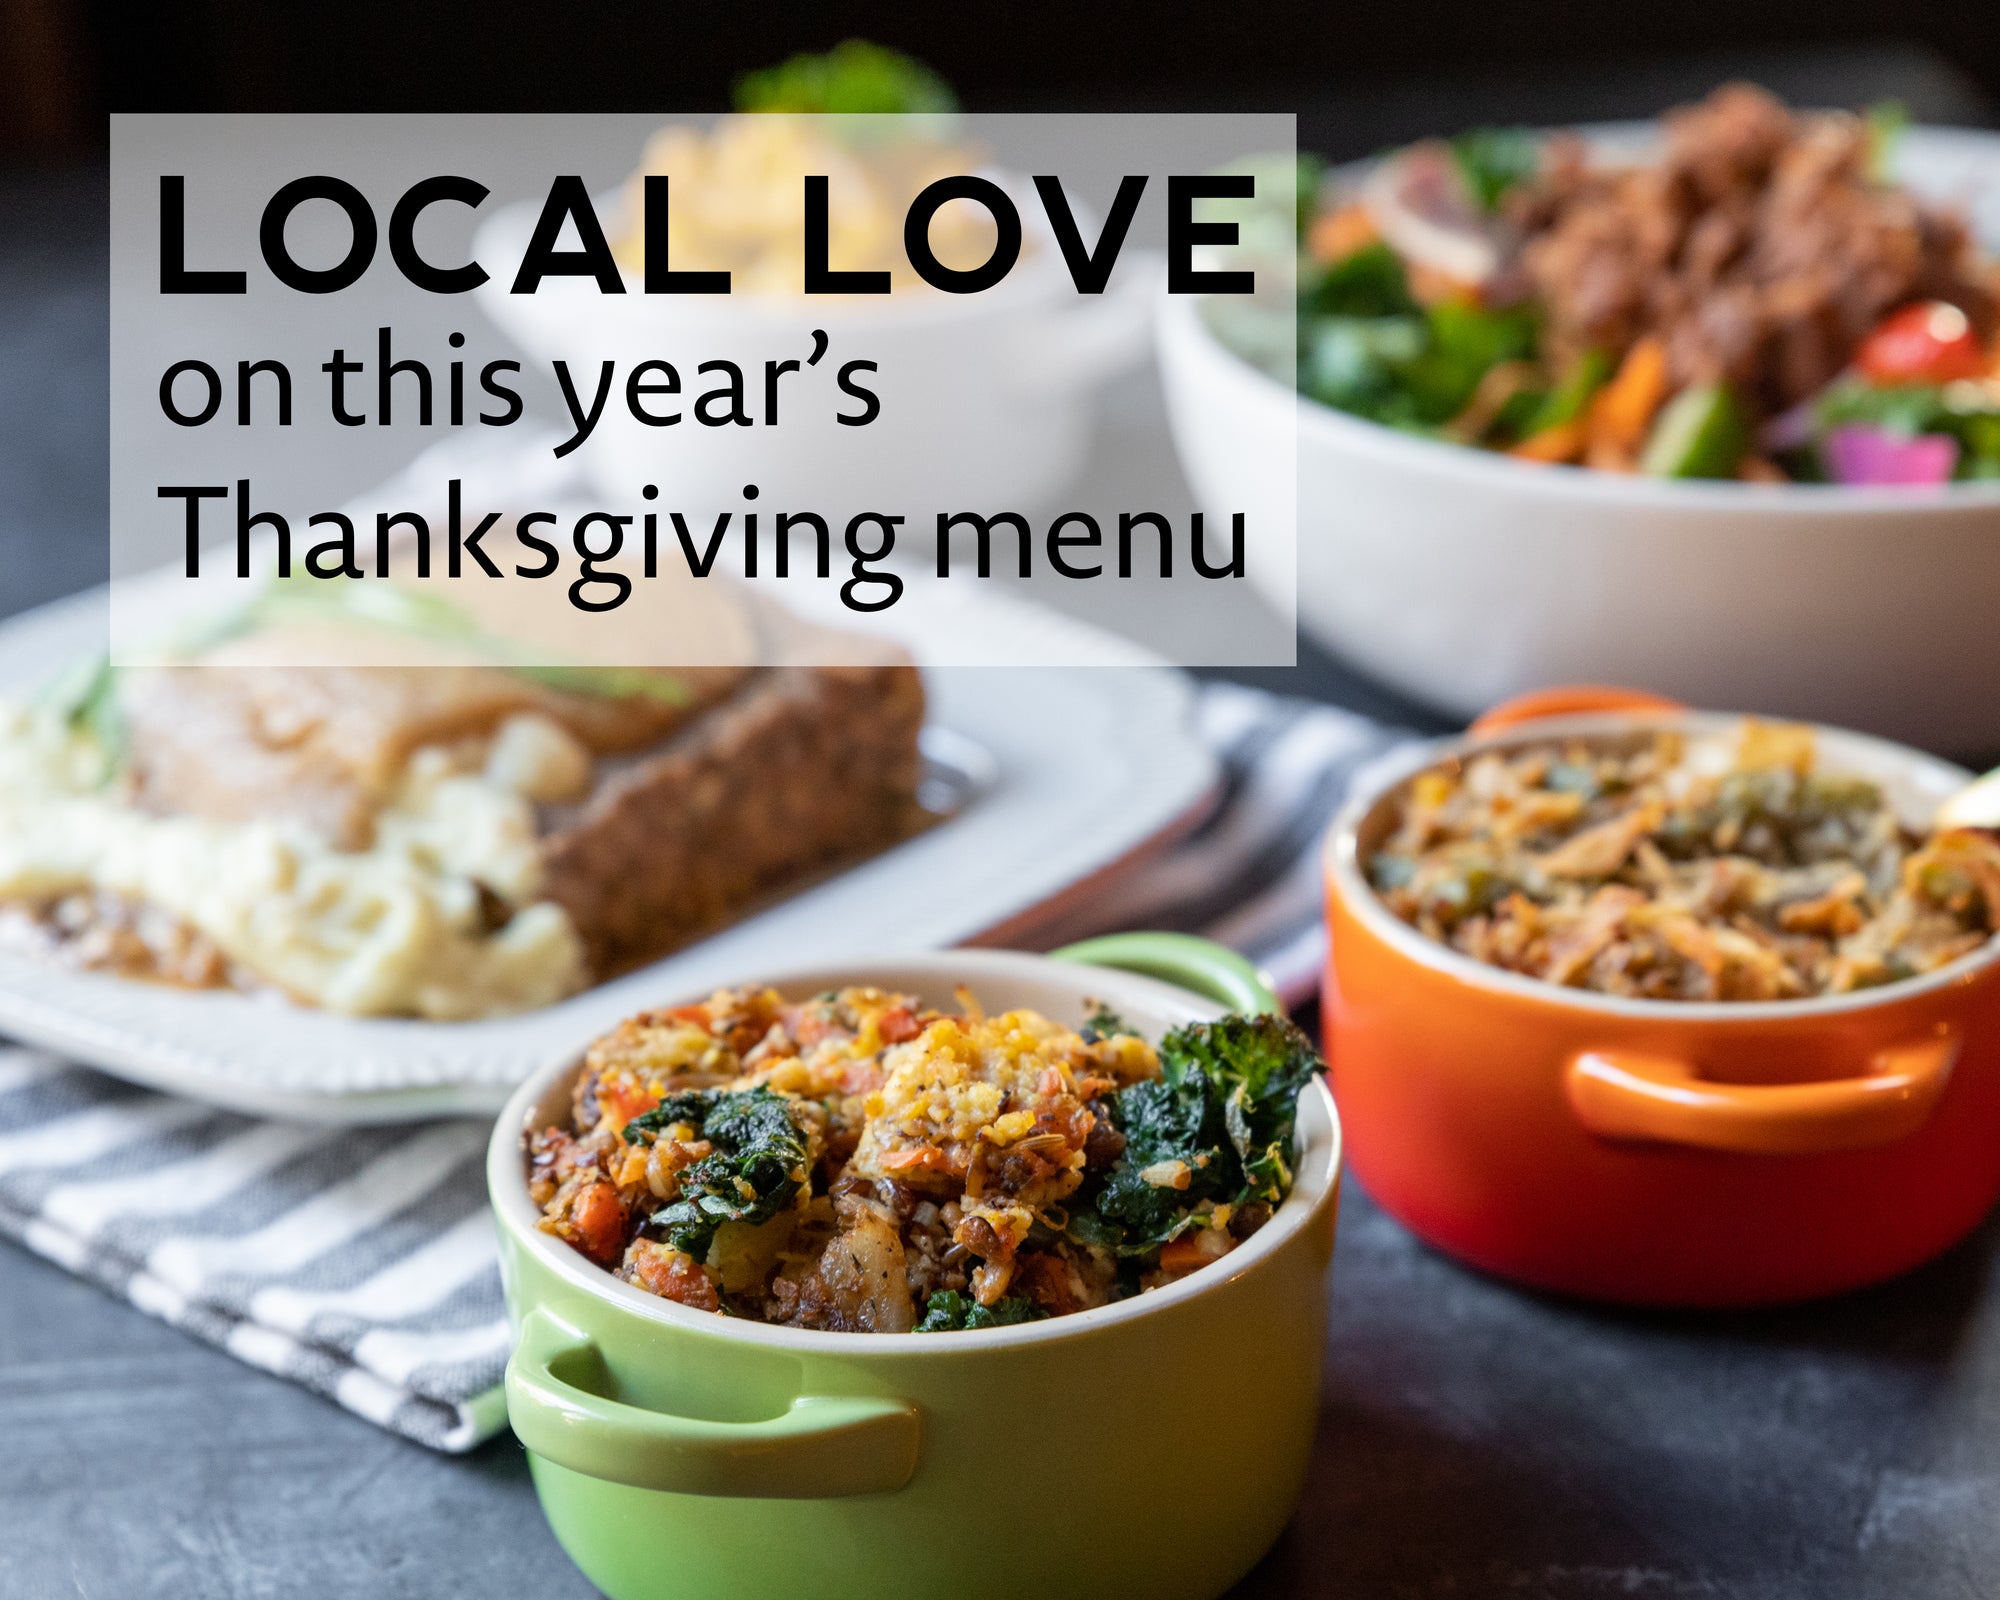 A list of local farms and artisans involved in this year's Thanksgiving menu!